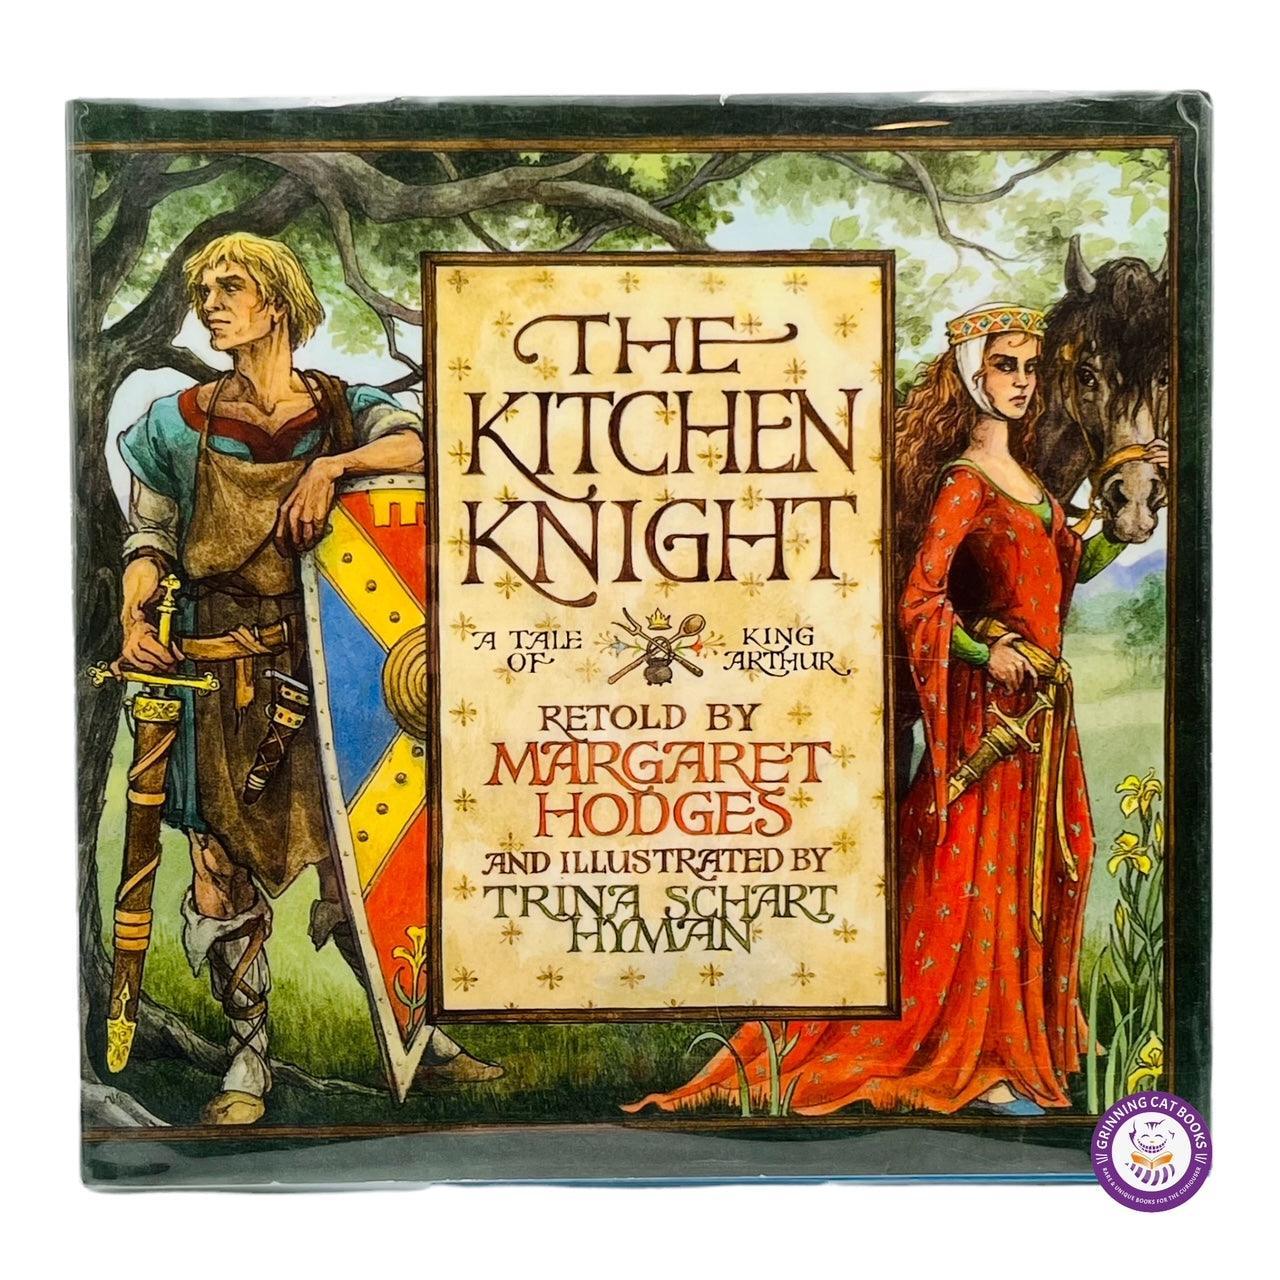 The Kitchen Knight: A Tale of King Arthur - Grinning Cat Books - CHILDREN'S LITERATURE - KING ARTHUR